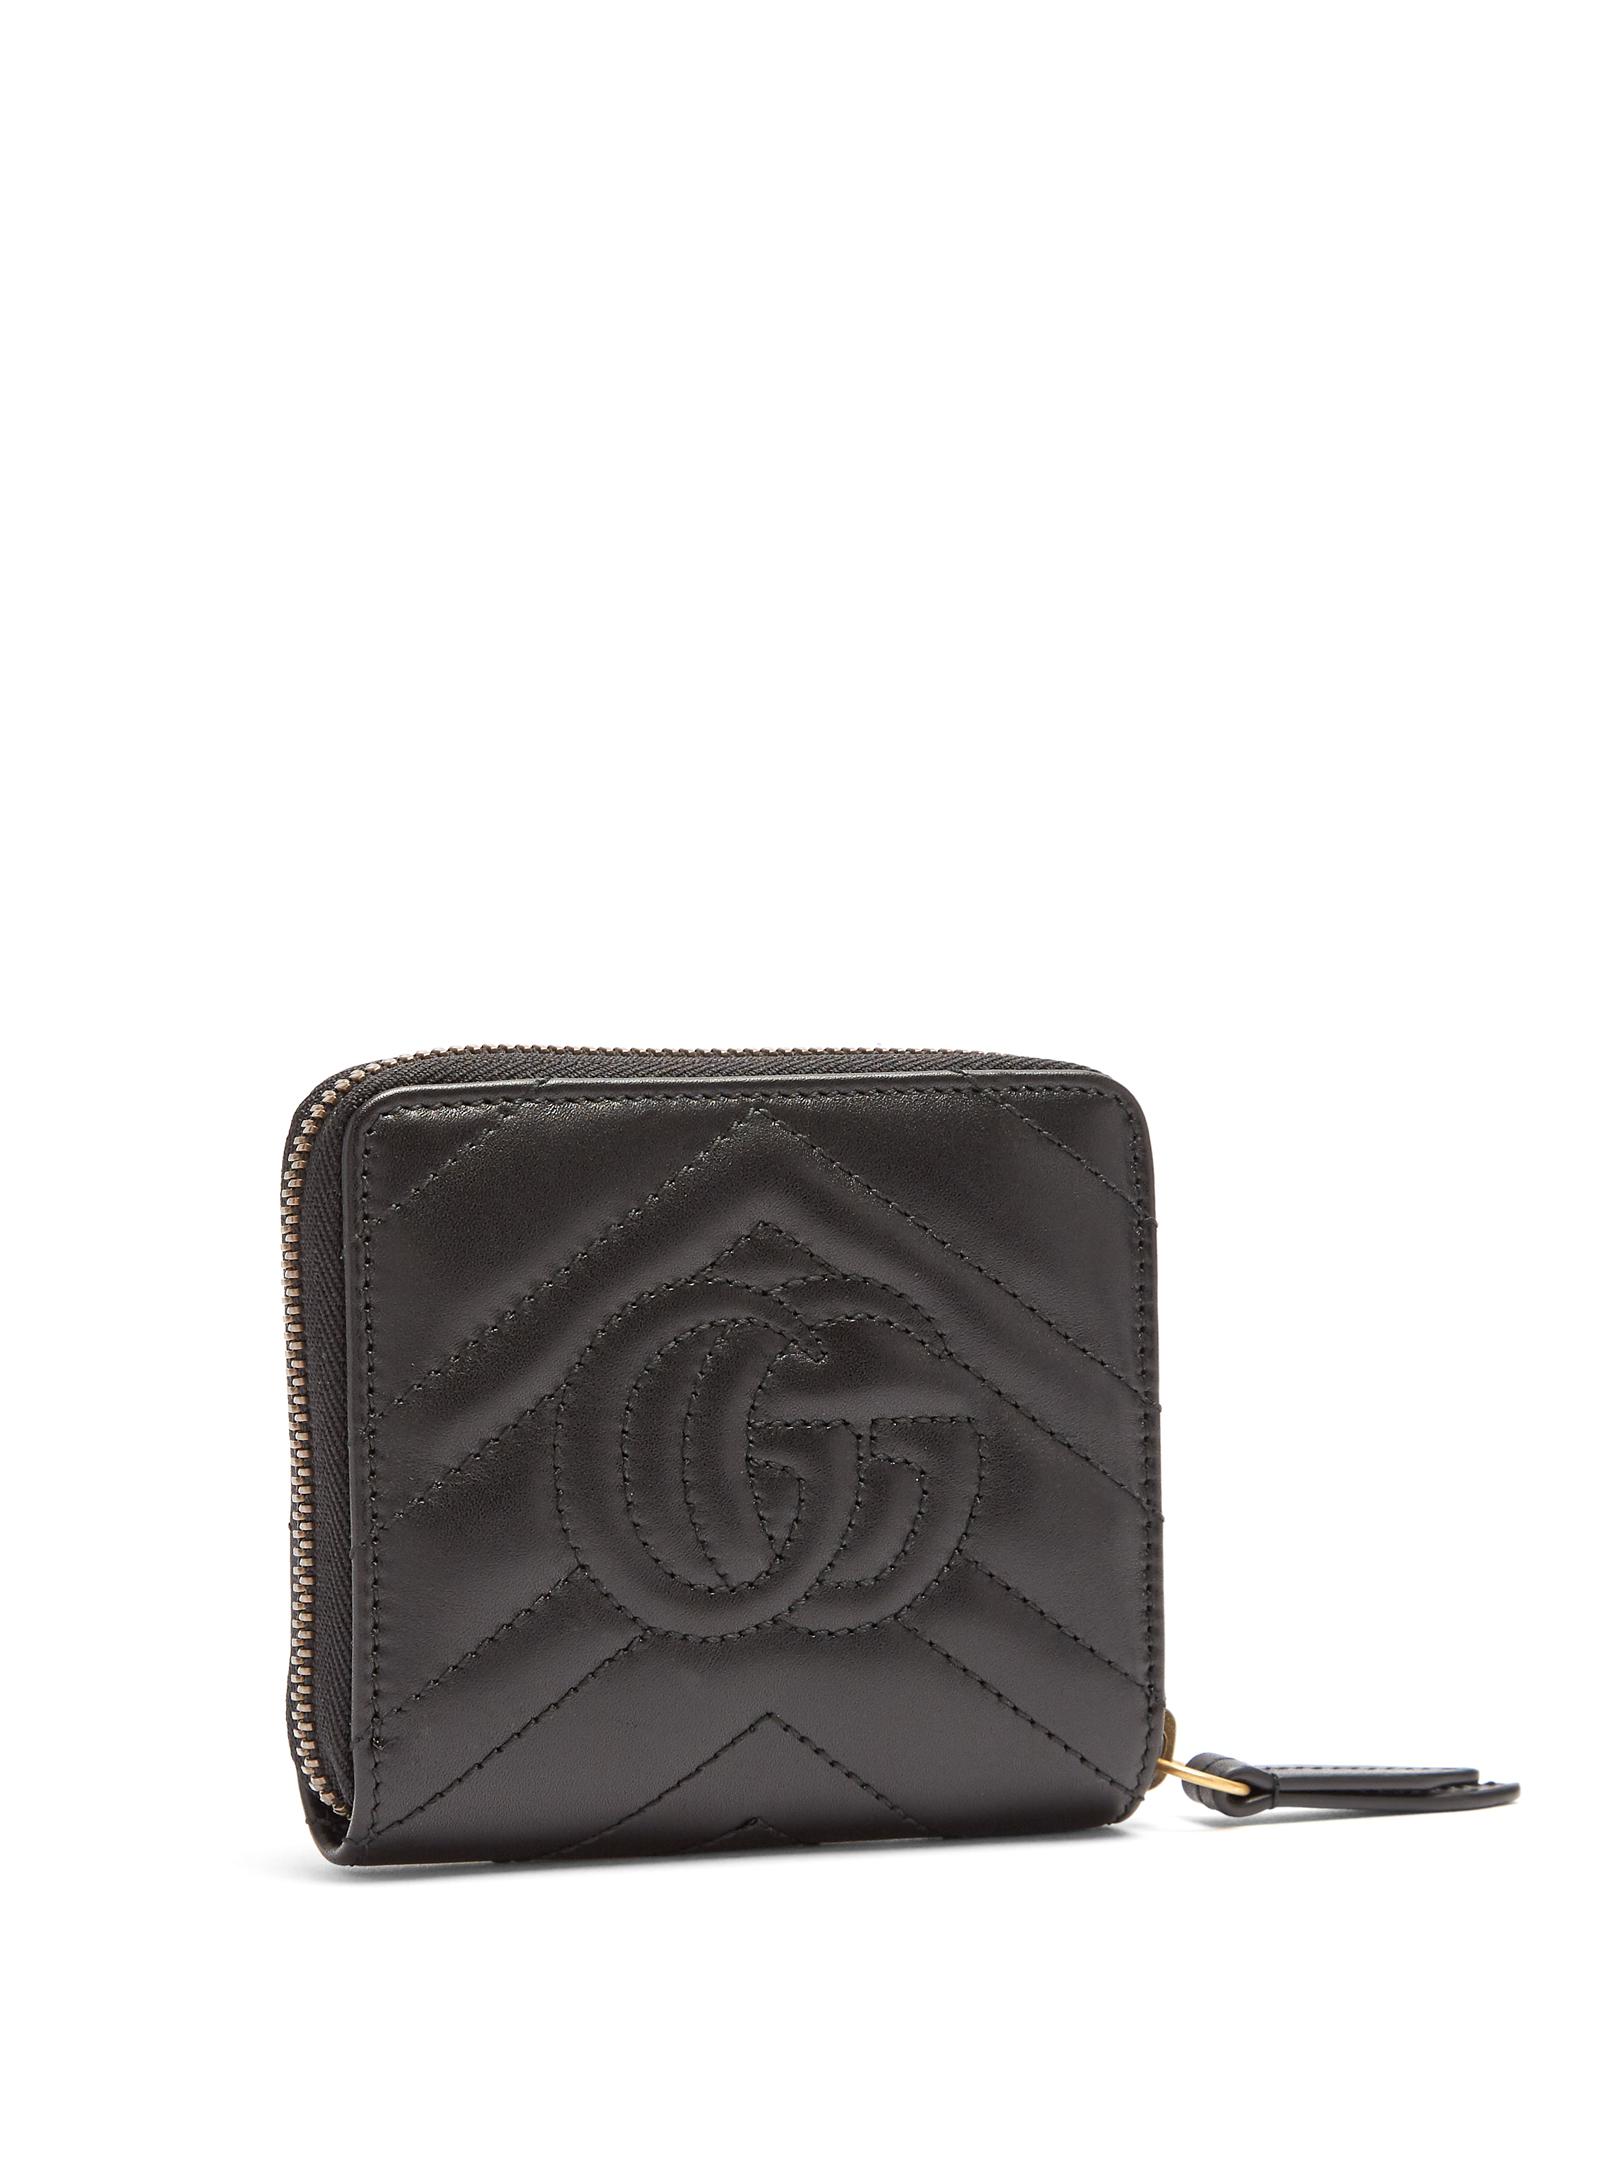 Gucci Gg Marmont Quilted-leather Wallet in Black - Lyst